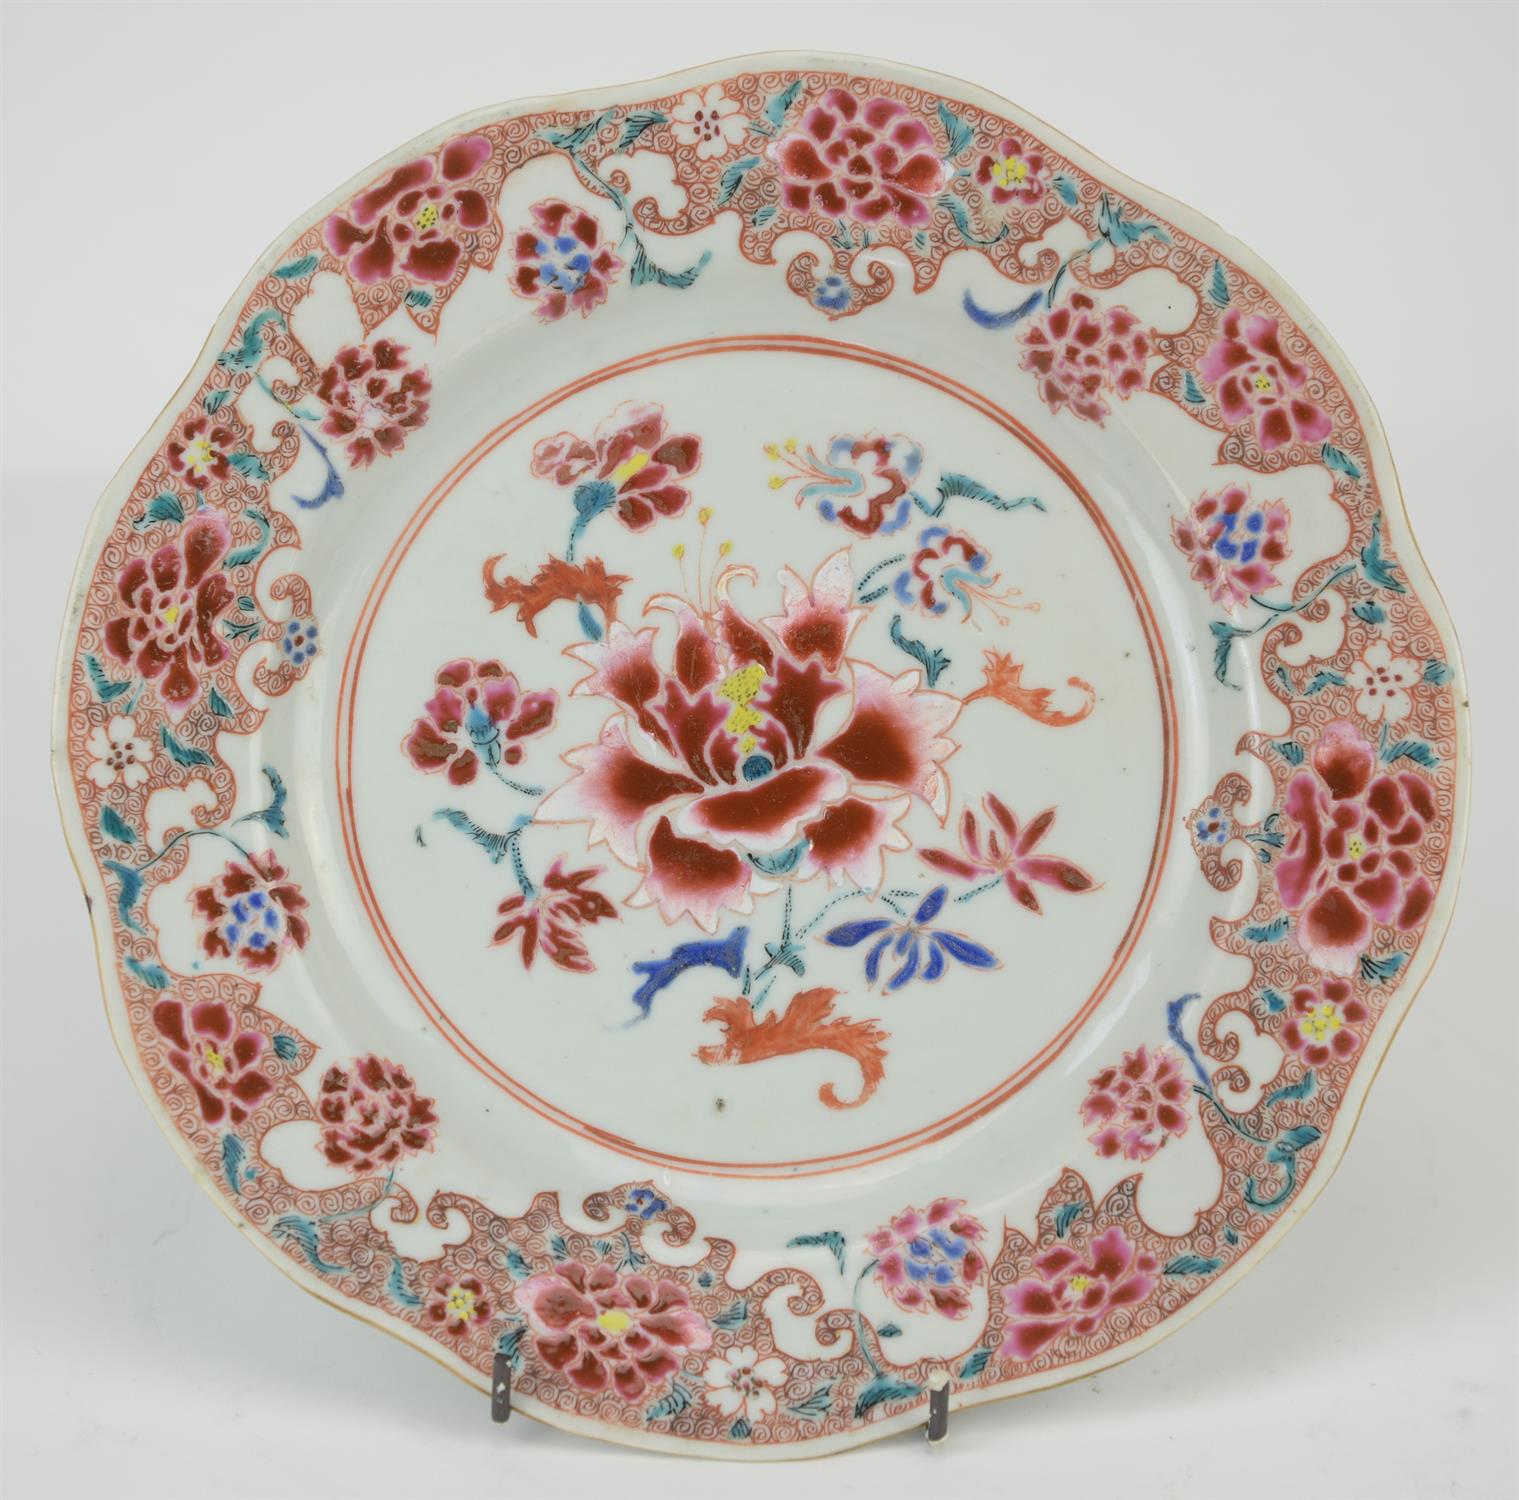 Eight famille rose dishes; each one decorated with floral designs and about 22.5 cm diameter, - Image 11 of 28